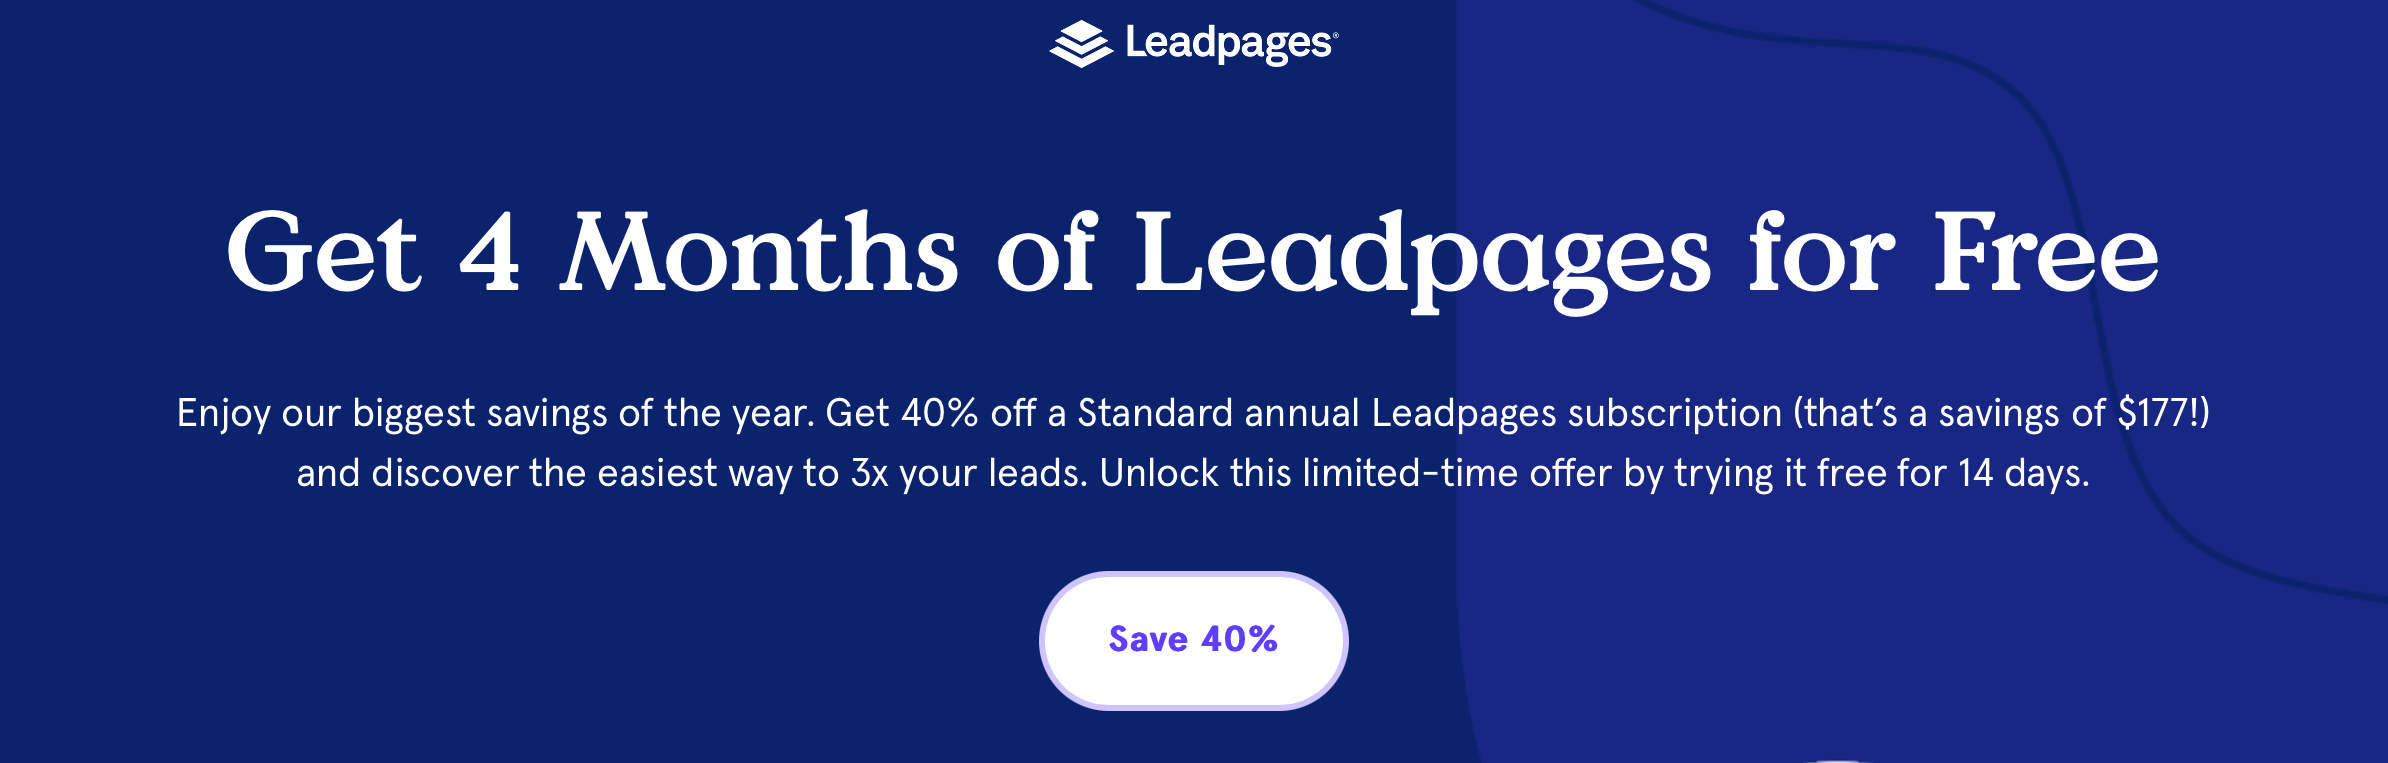 Leadpages black friday